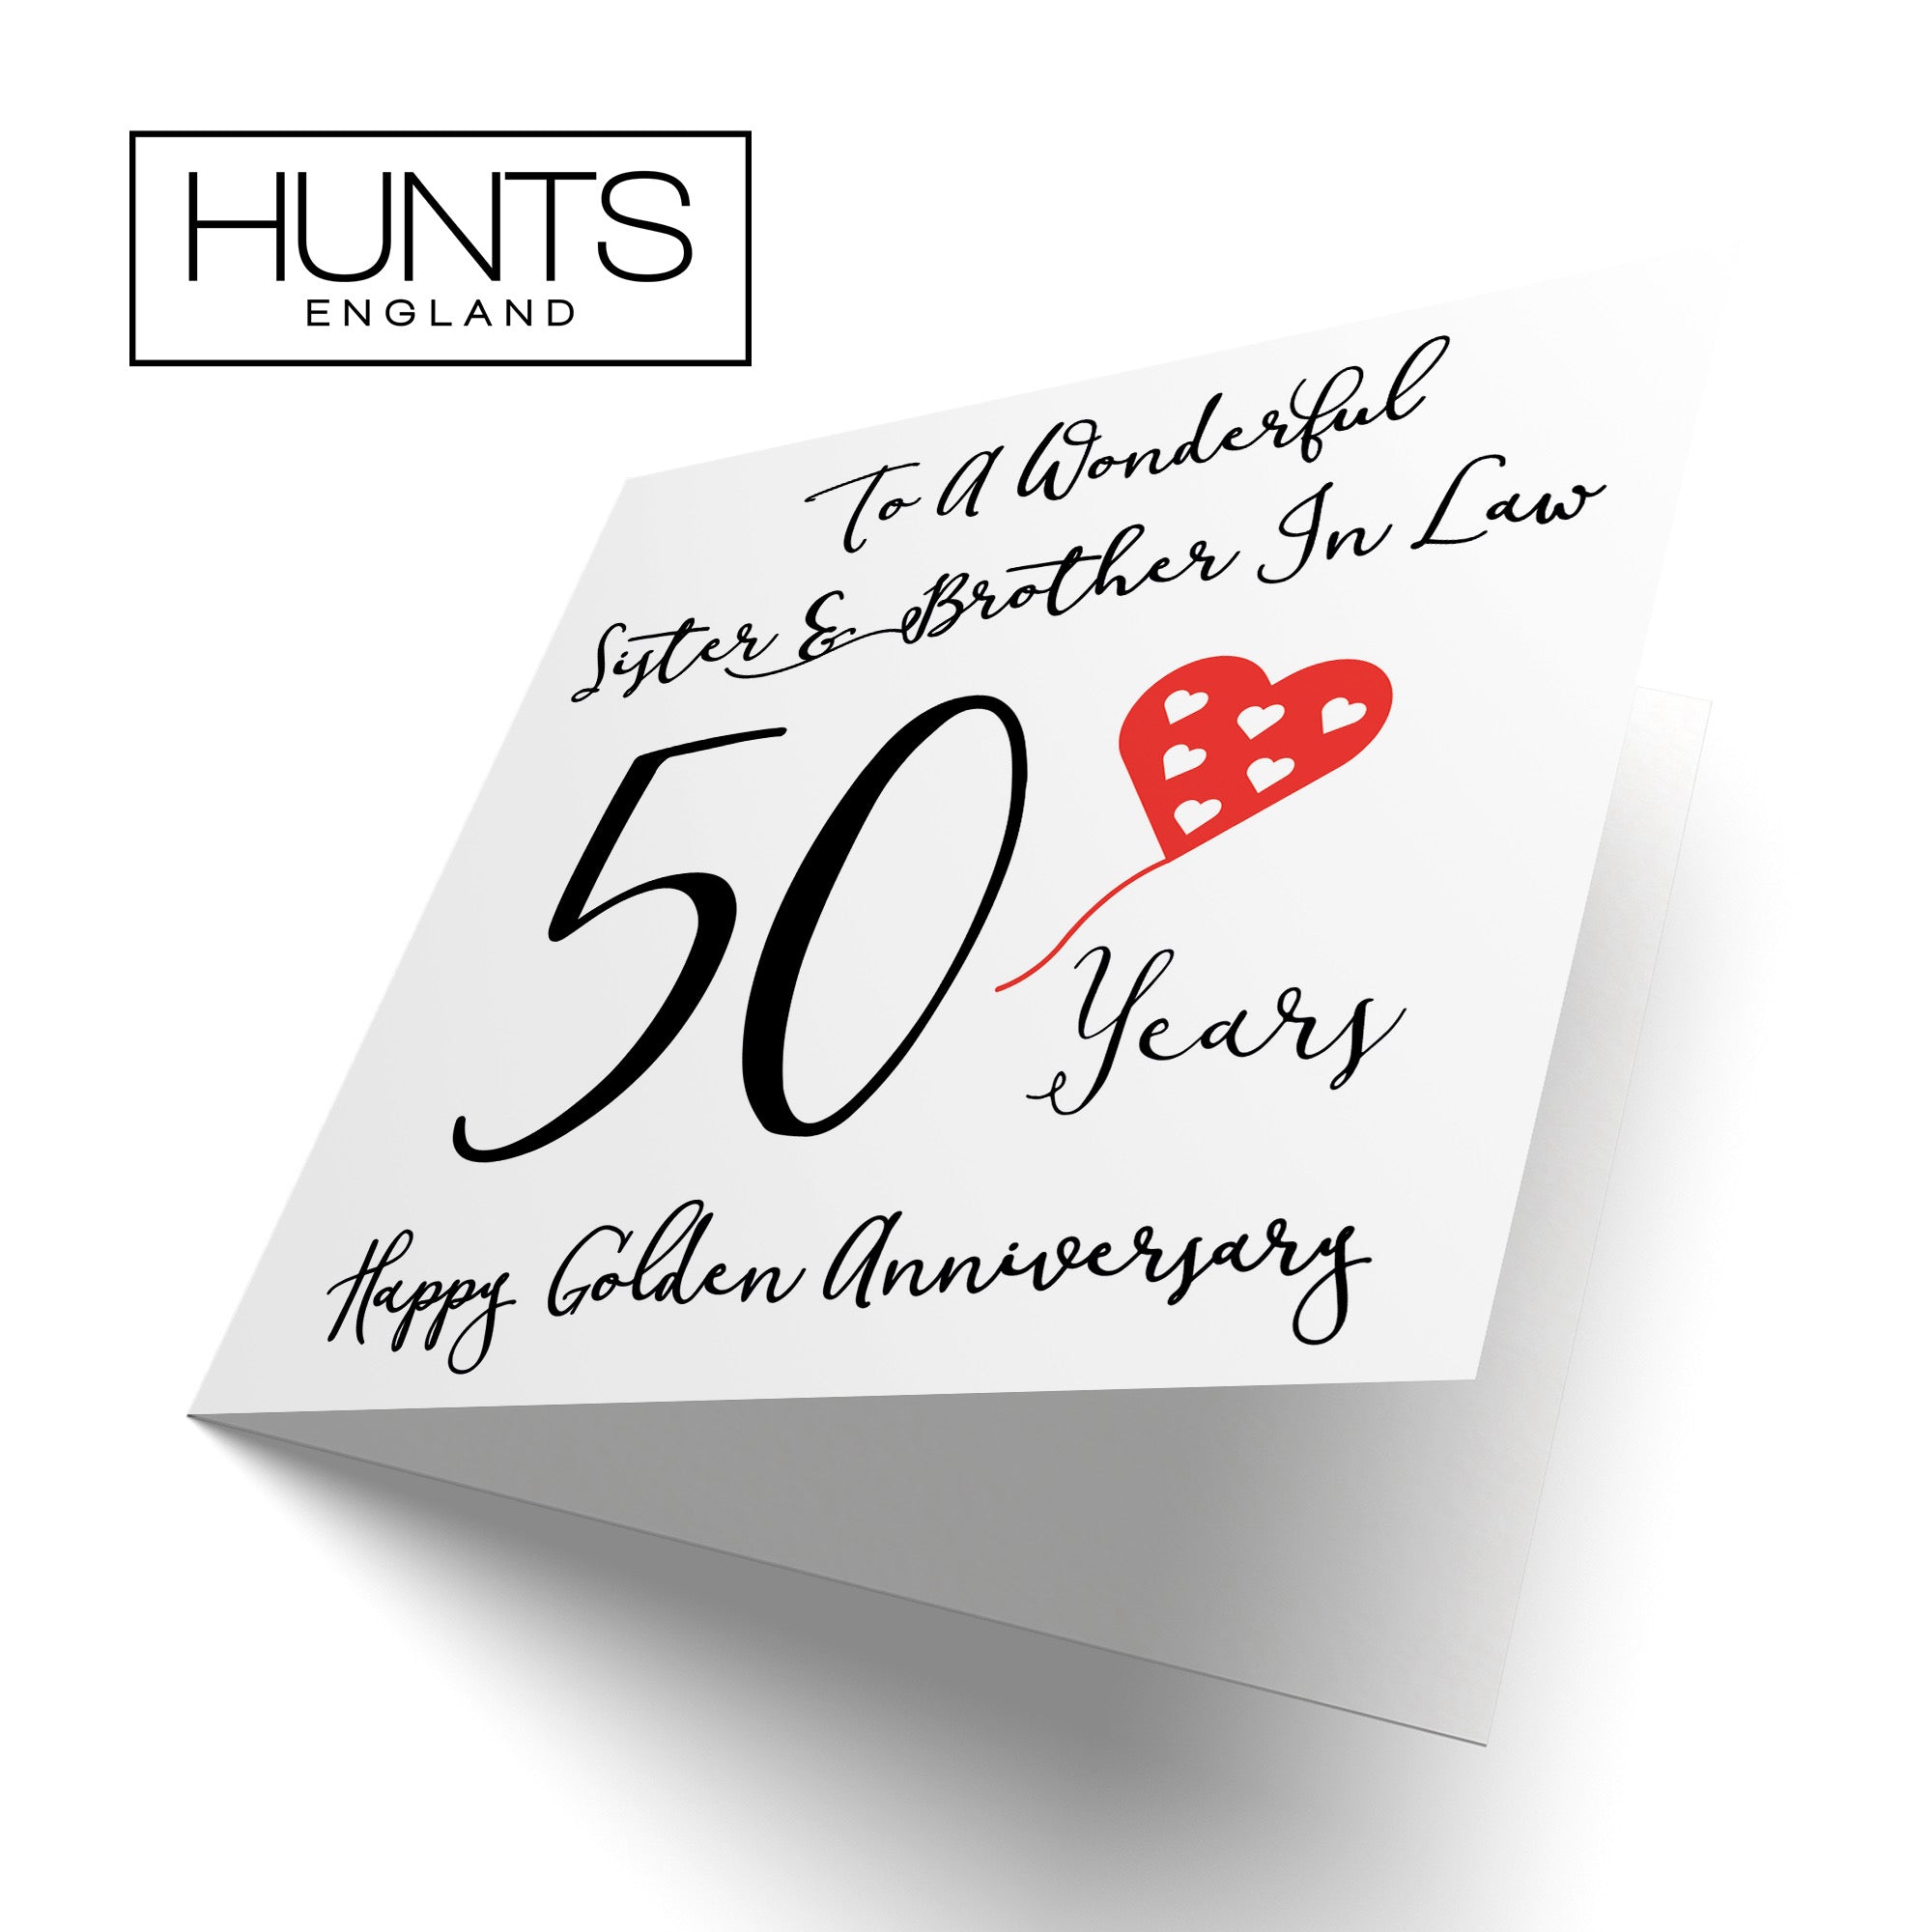 50th Sister And Brother In Law Anniversary Card Love Heart - Default Title (B098FFNGKJ)